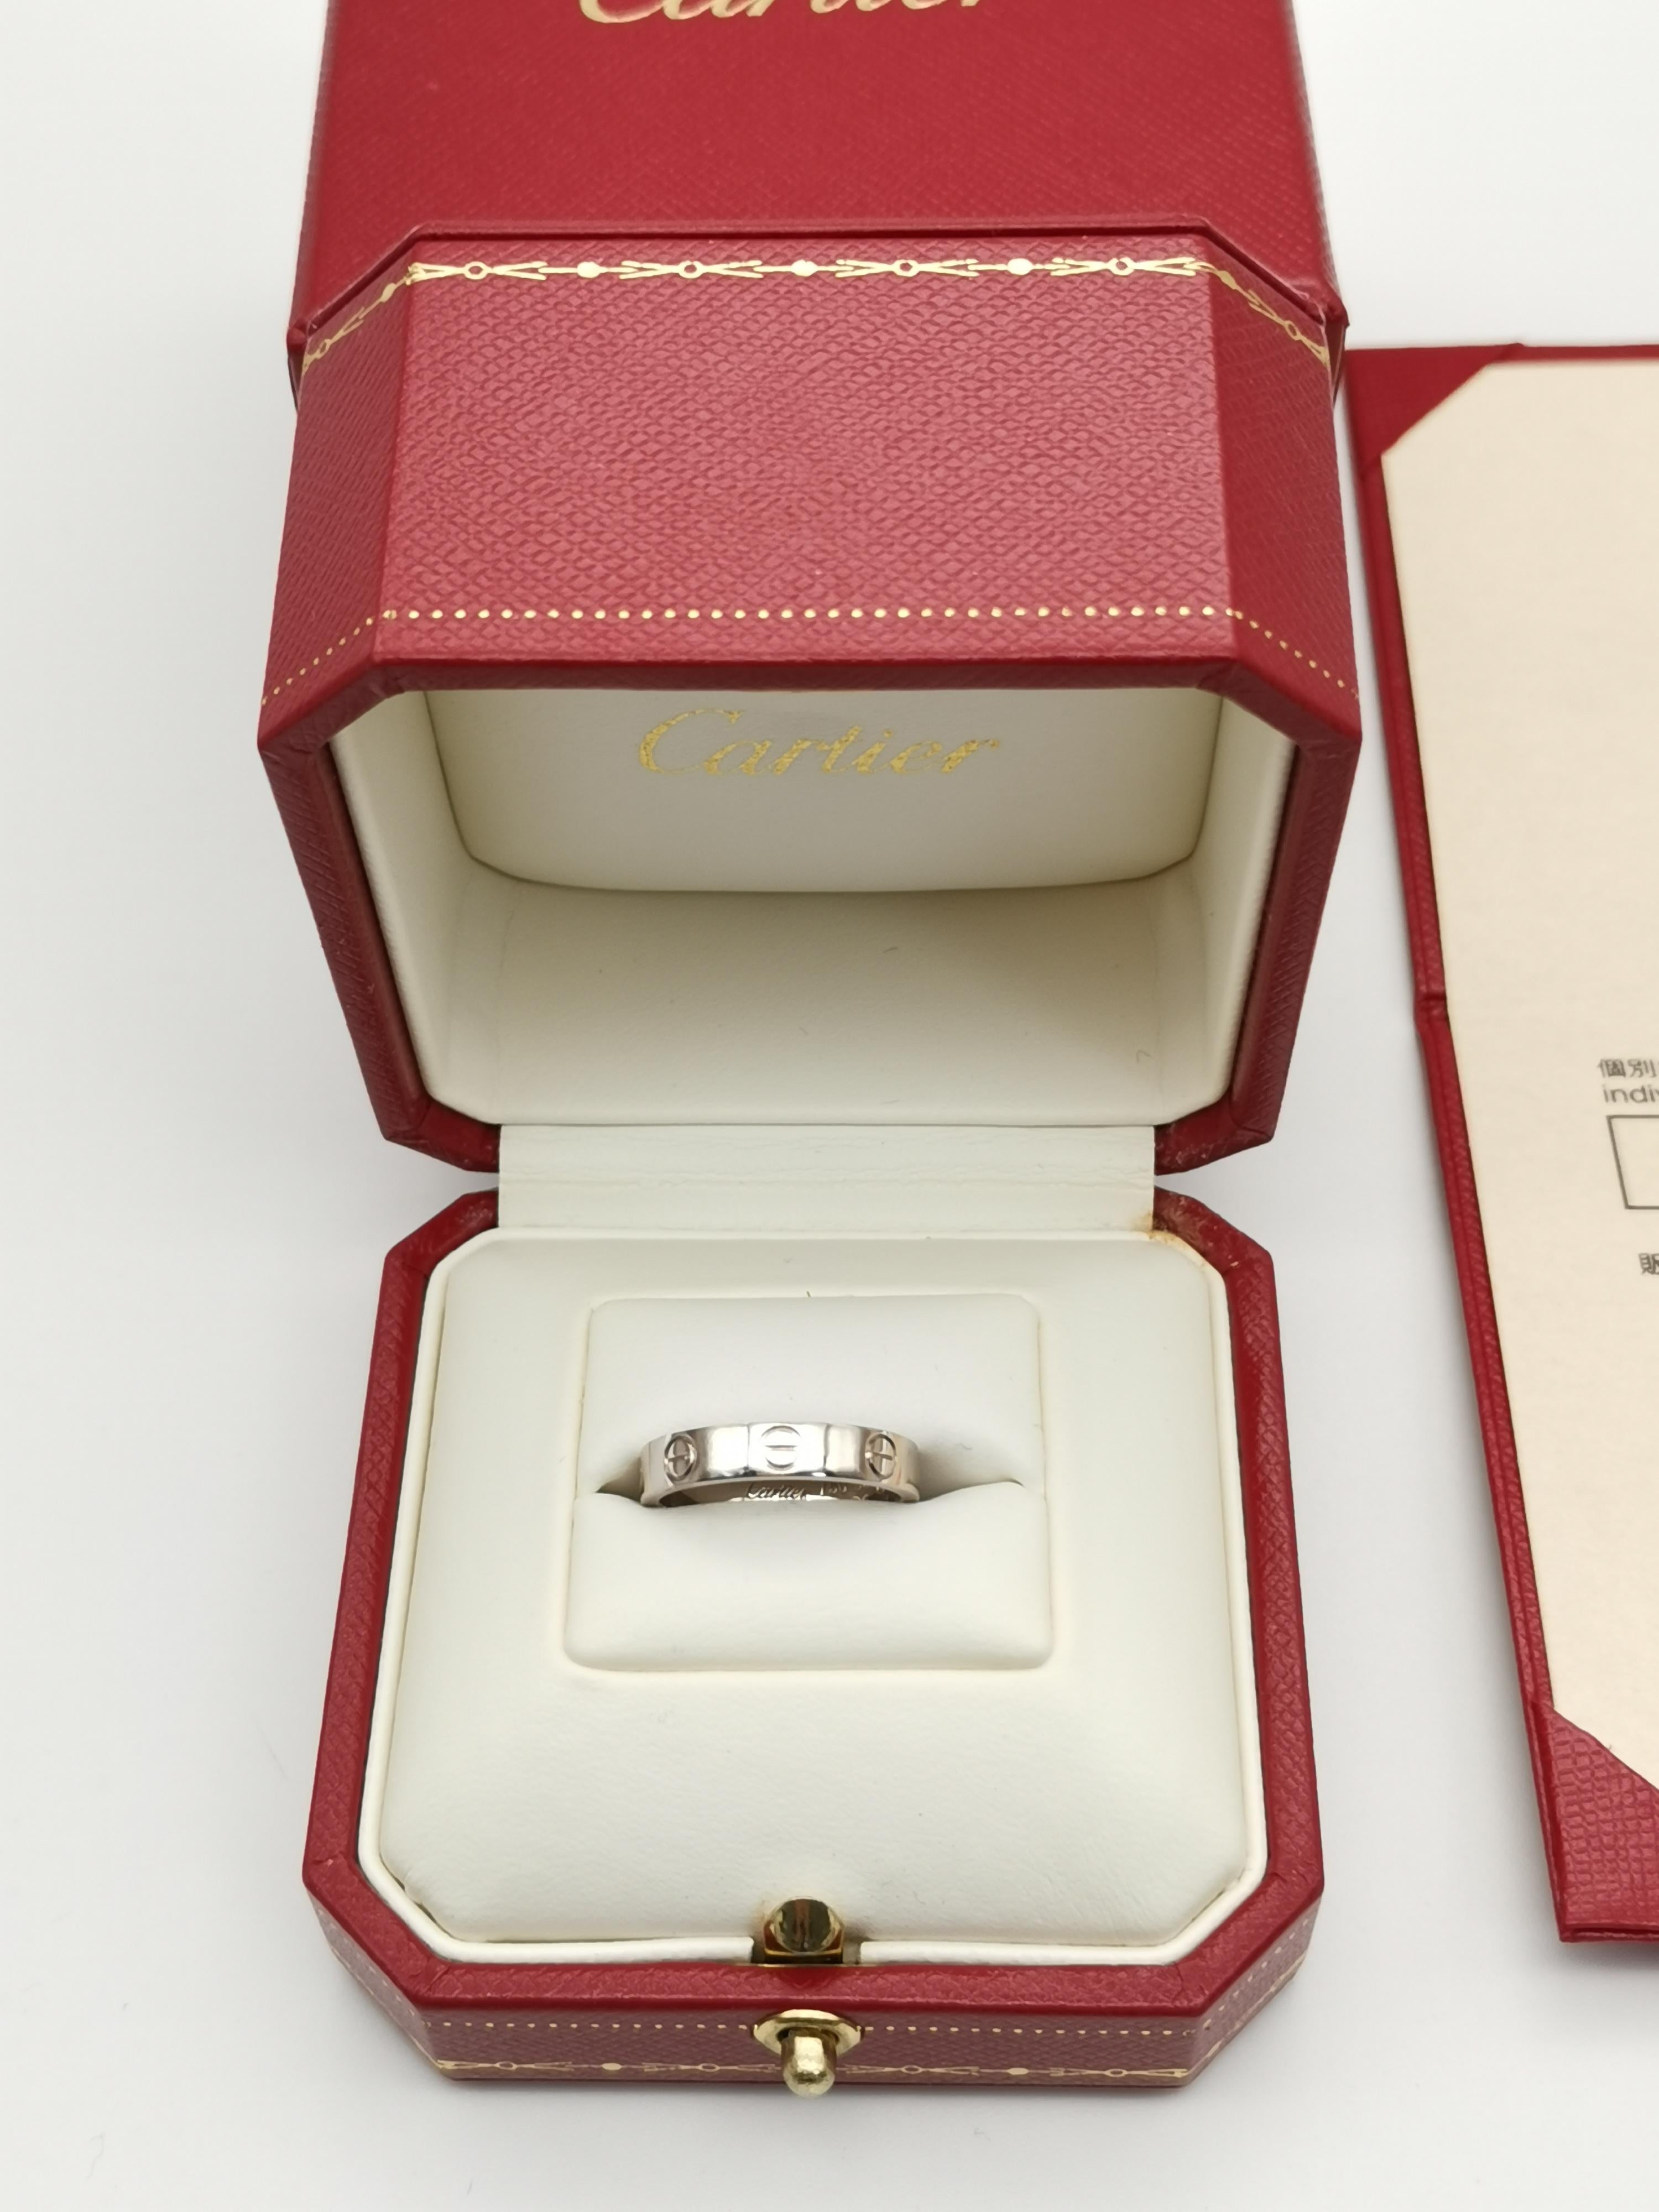 Cartier White Gold Mini Love Wedding Band Ring 1